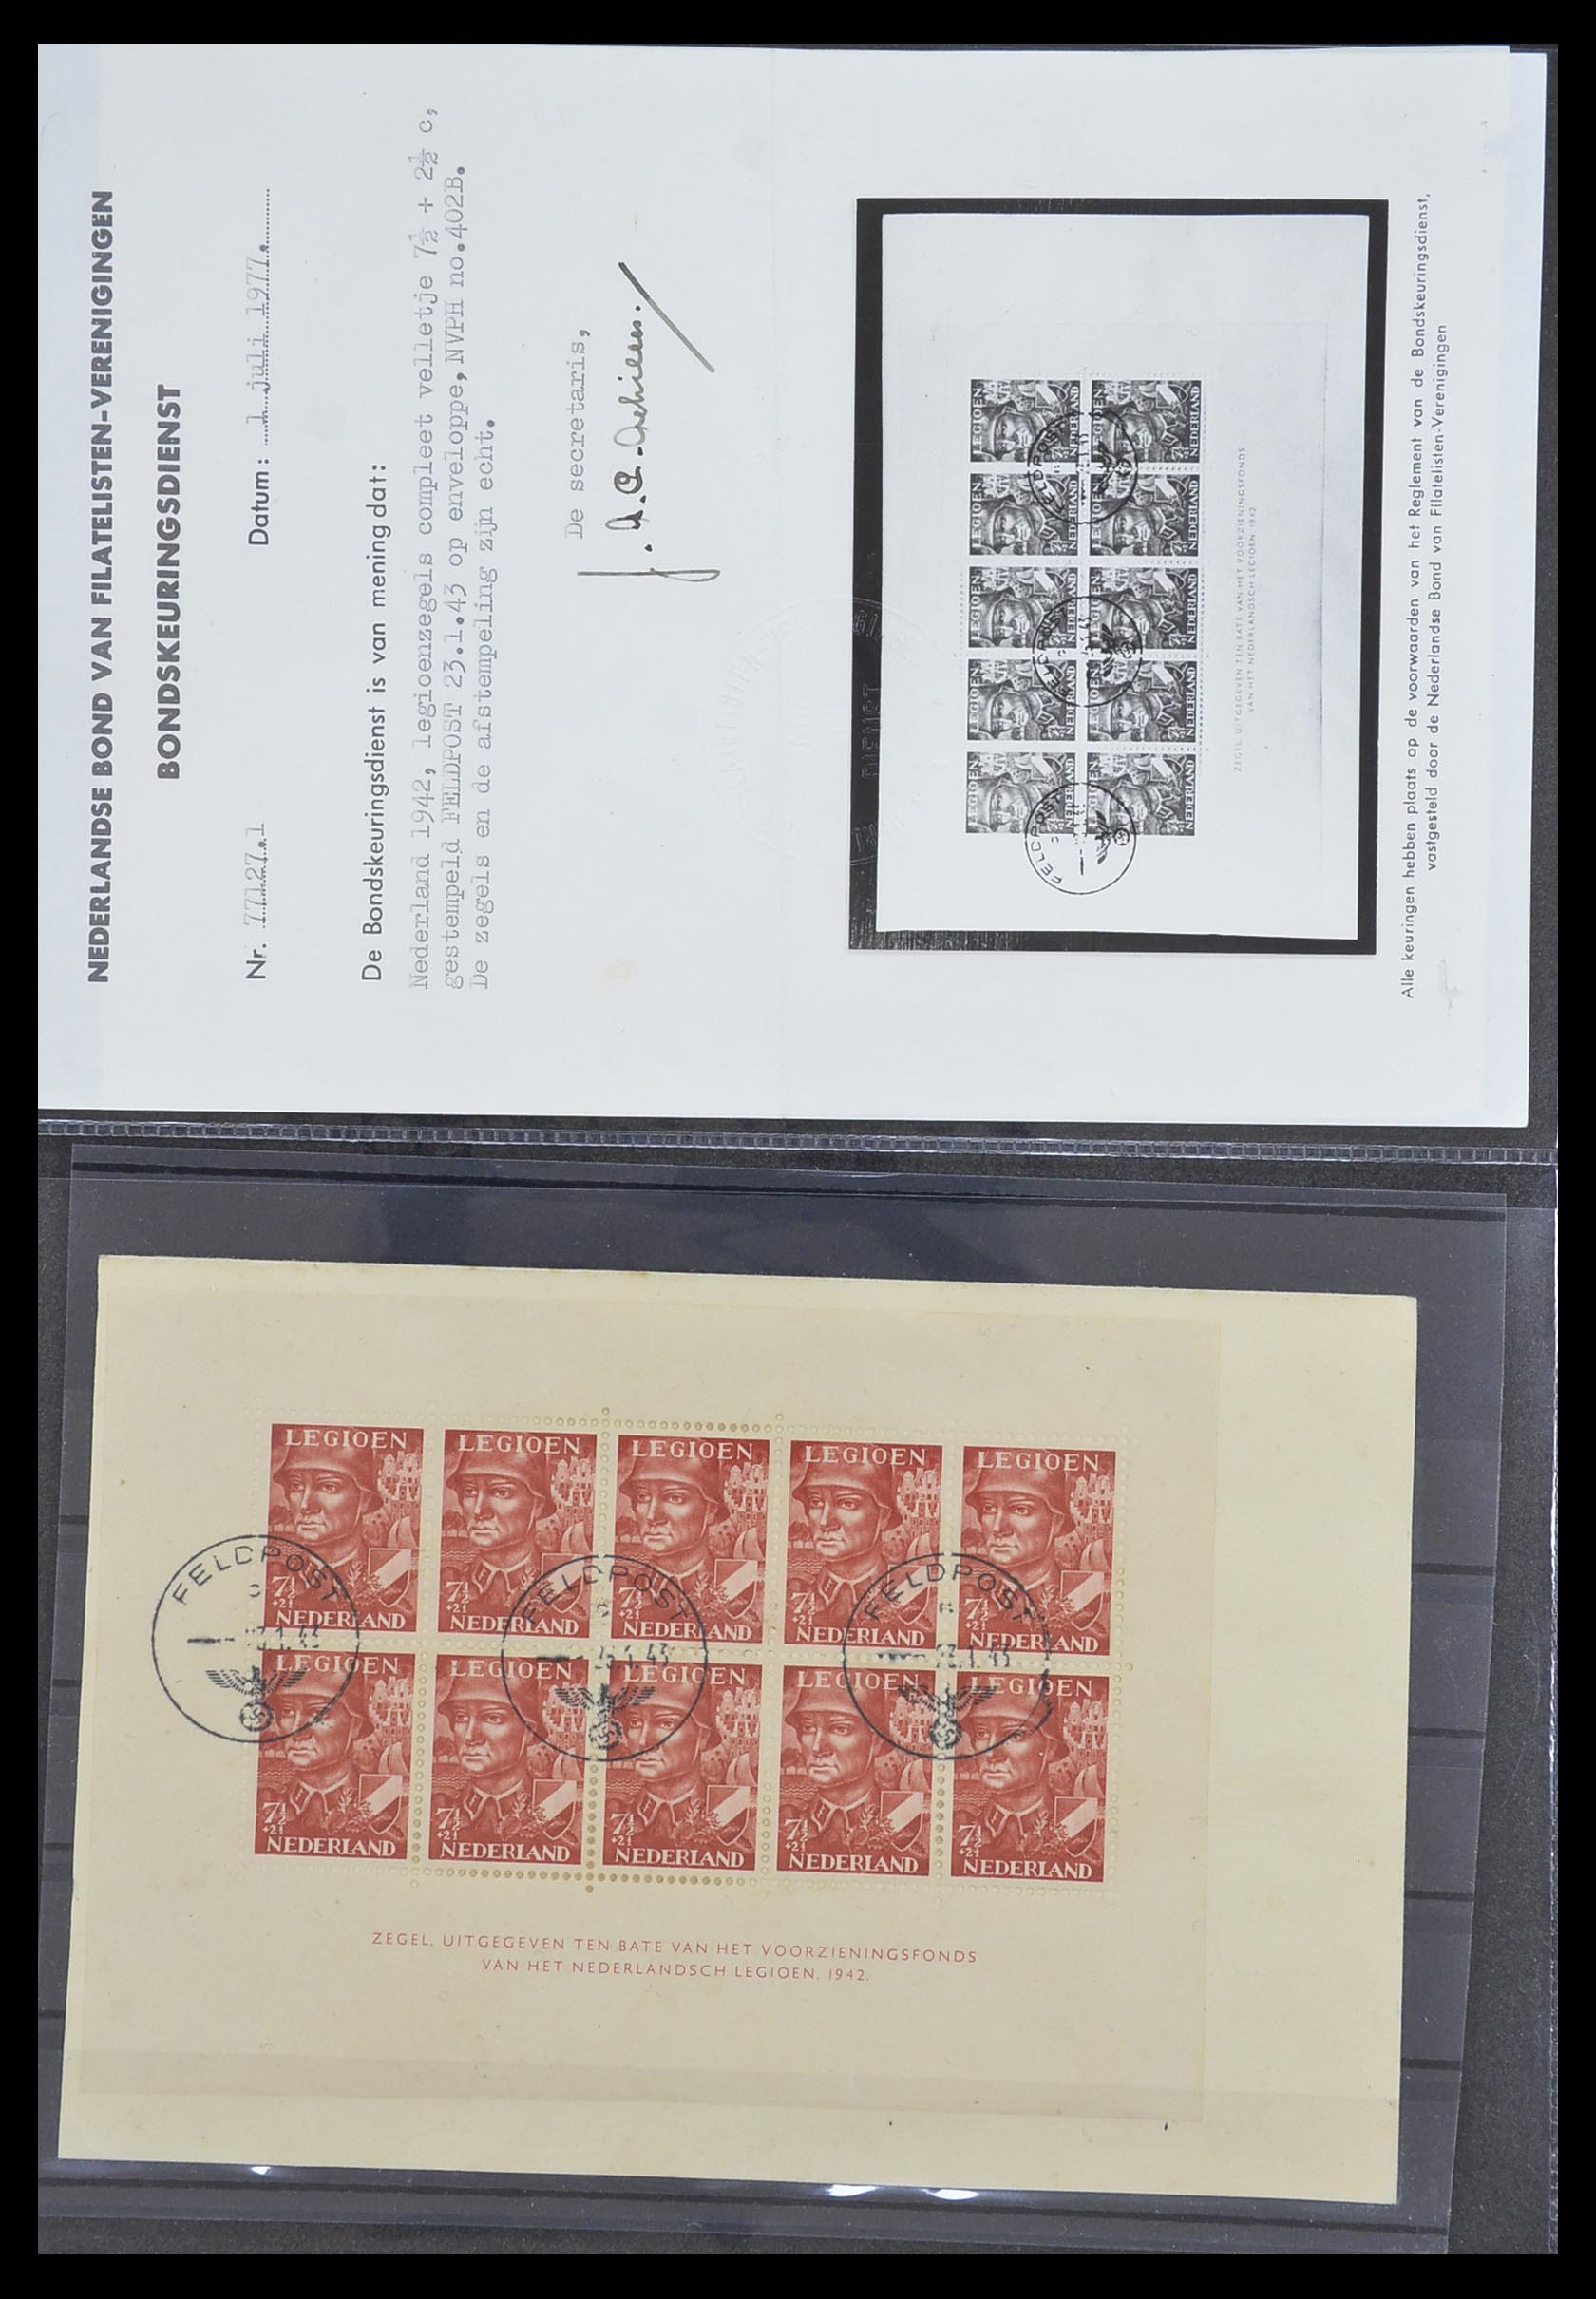 33330 139 - Stamp collection 33330 Netherlands covers 1852-1959.